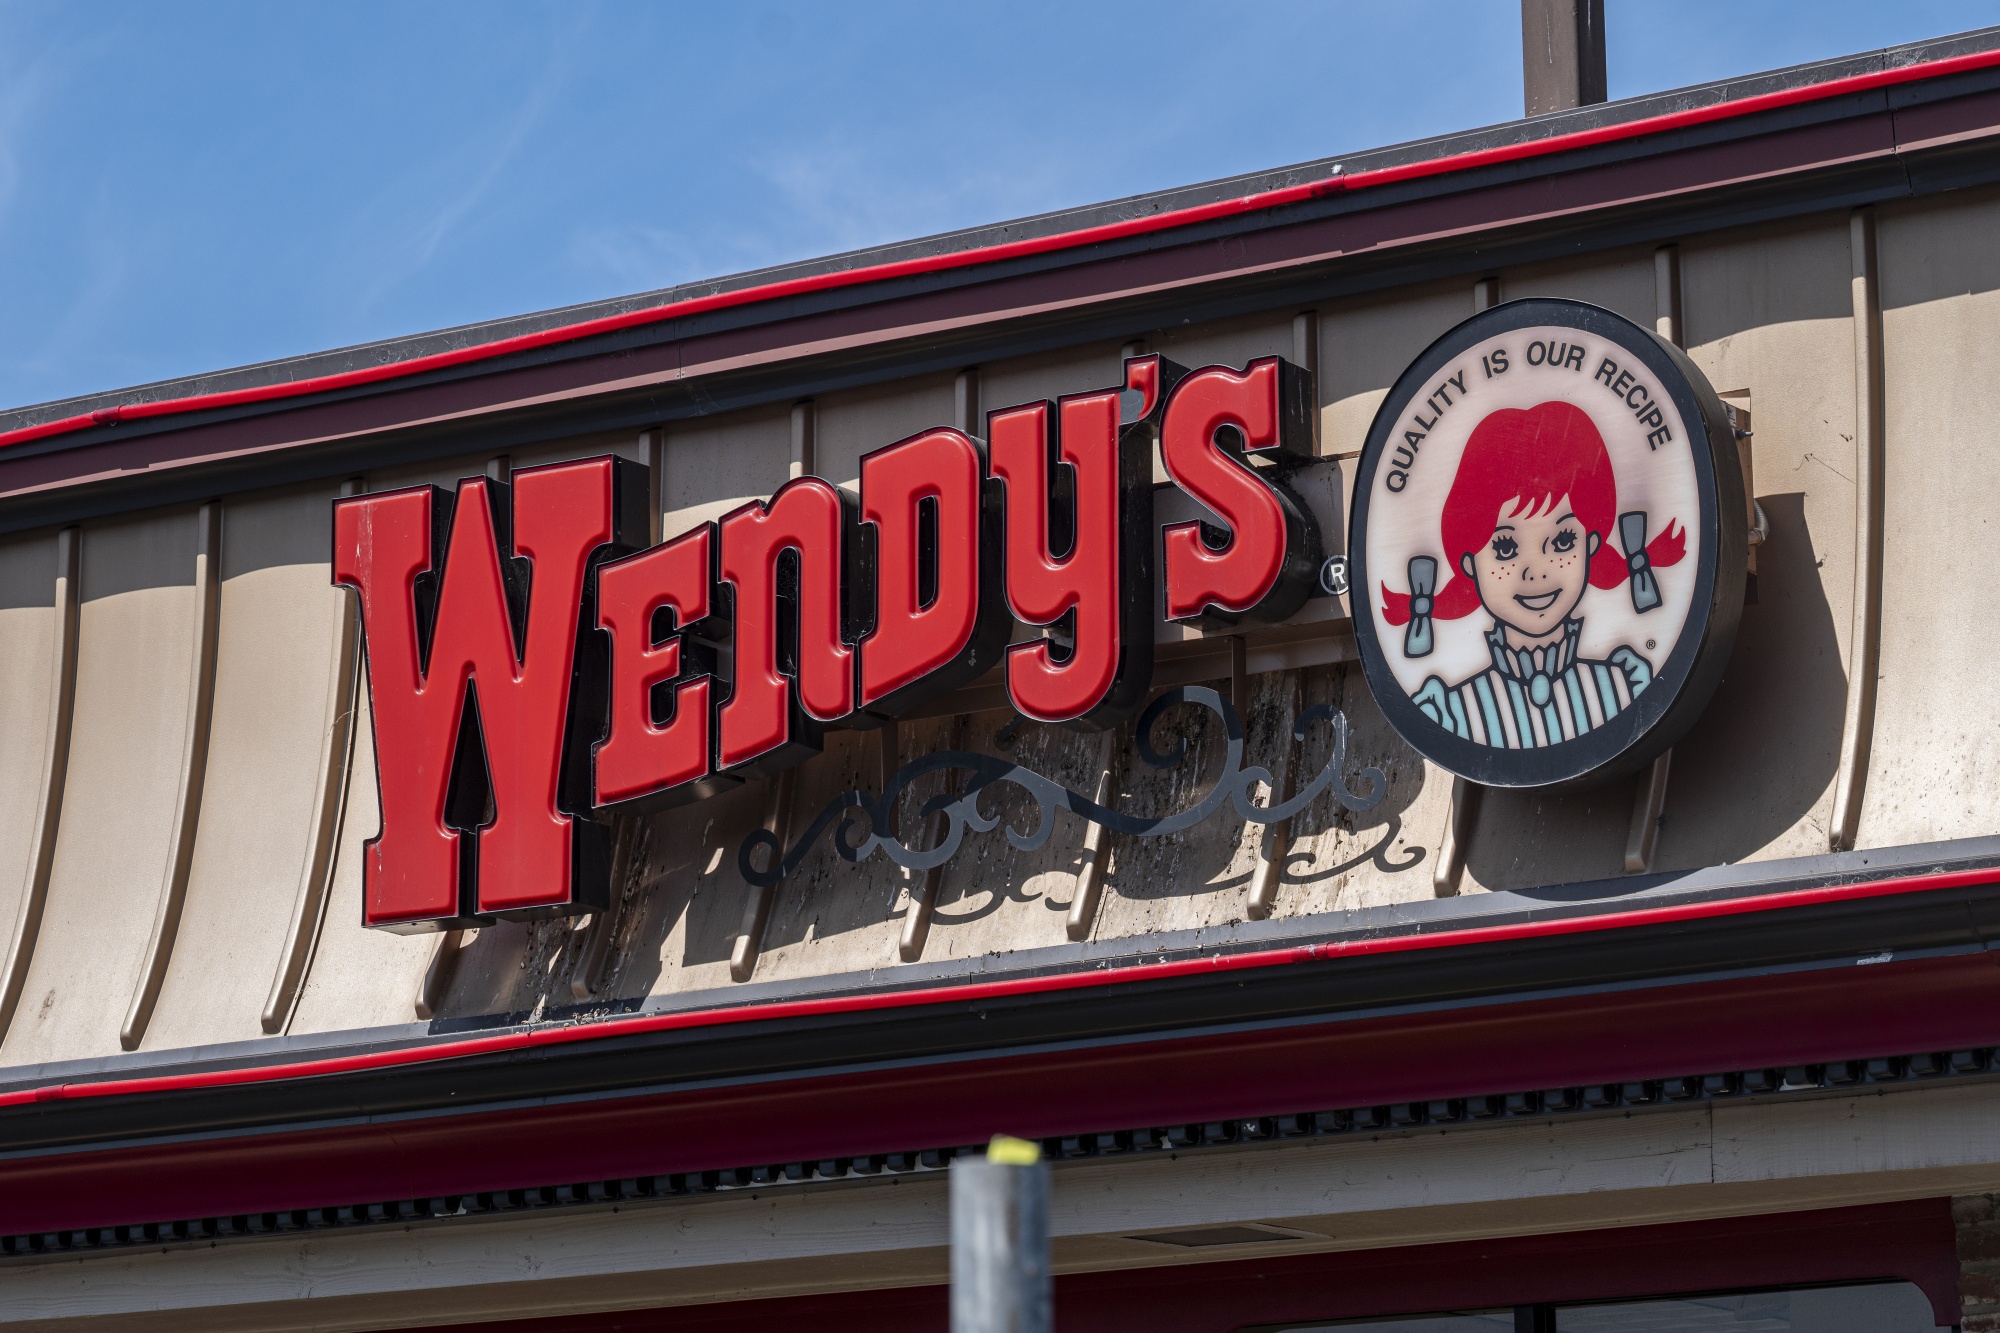 A Wendy's fast food restaurant in Vallejo, California.